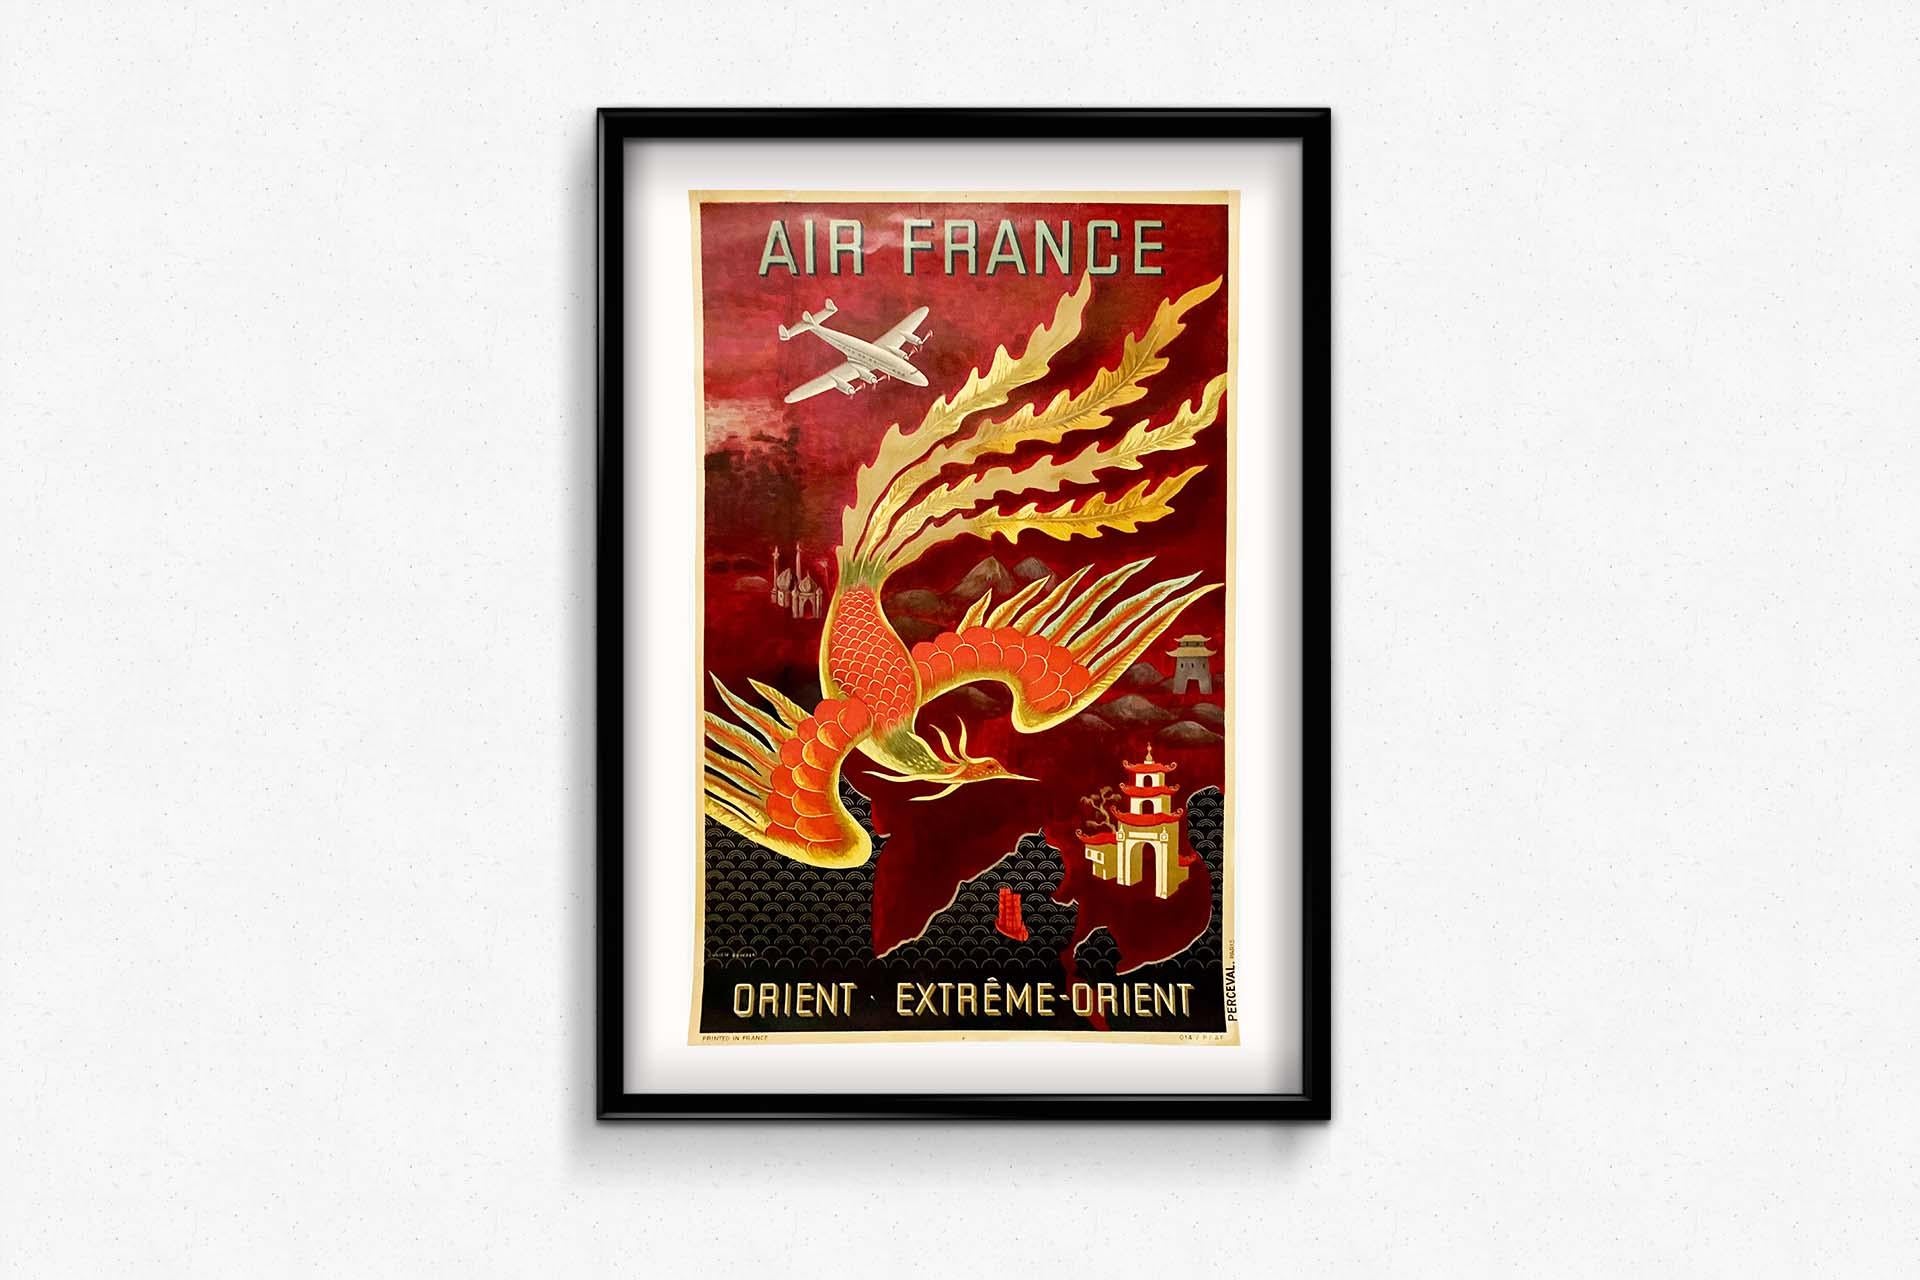 1946 Original Air France travel poster by Lucien Boucher for travels to far east For Sale 3